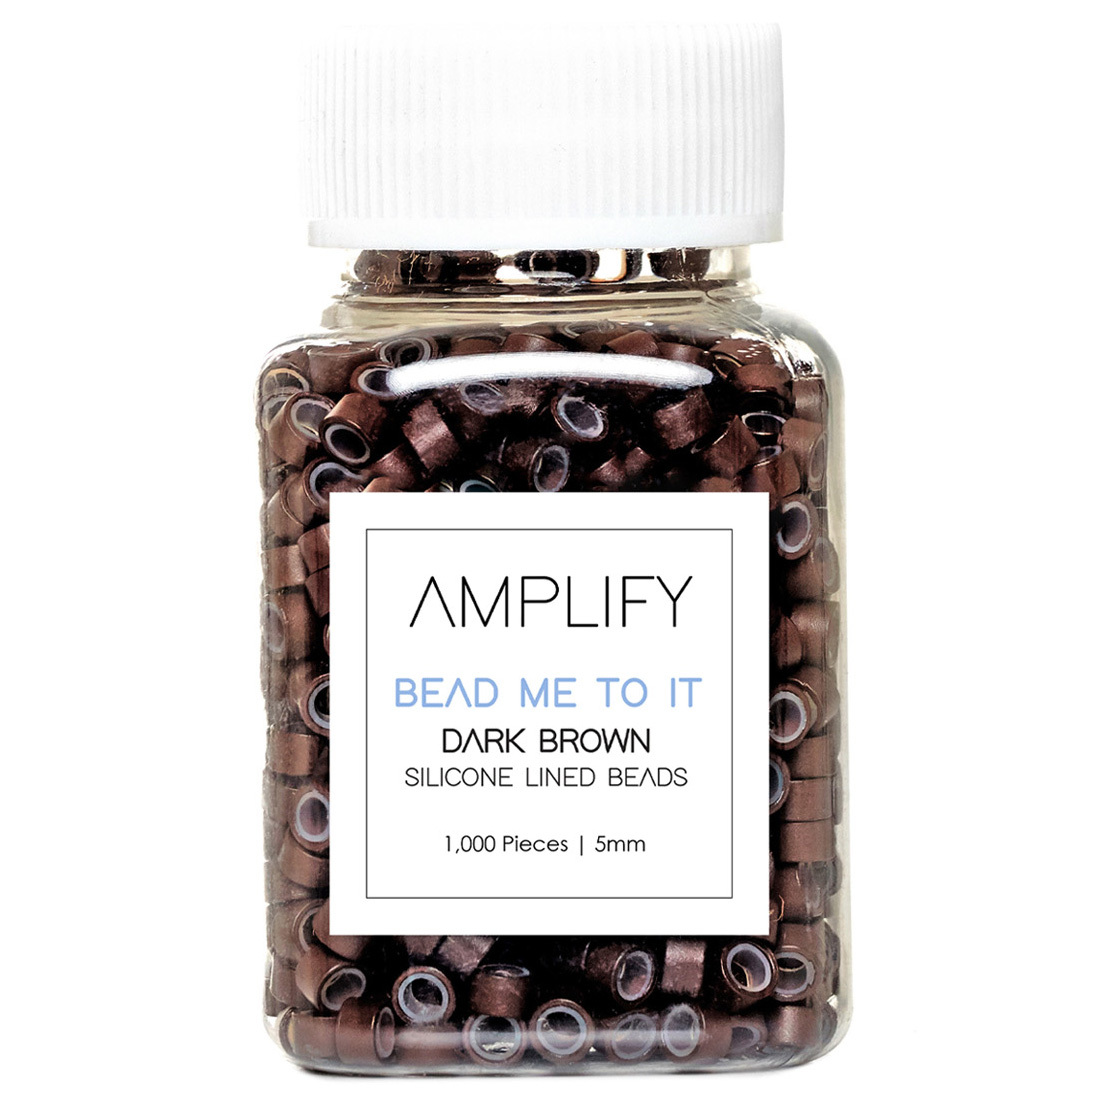 AMPLIFY TOOLS & SUPPLIES: NANO Bead Me To It: Dark Brown 3mm Beads - 1300ct